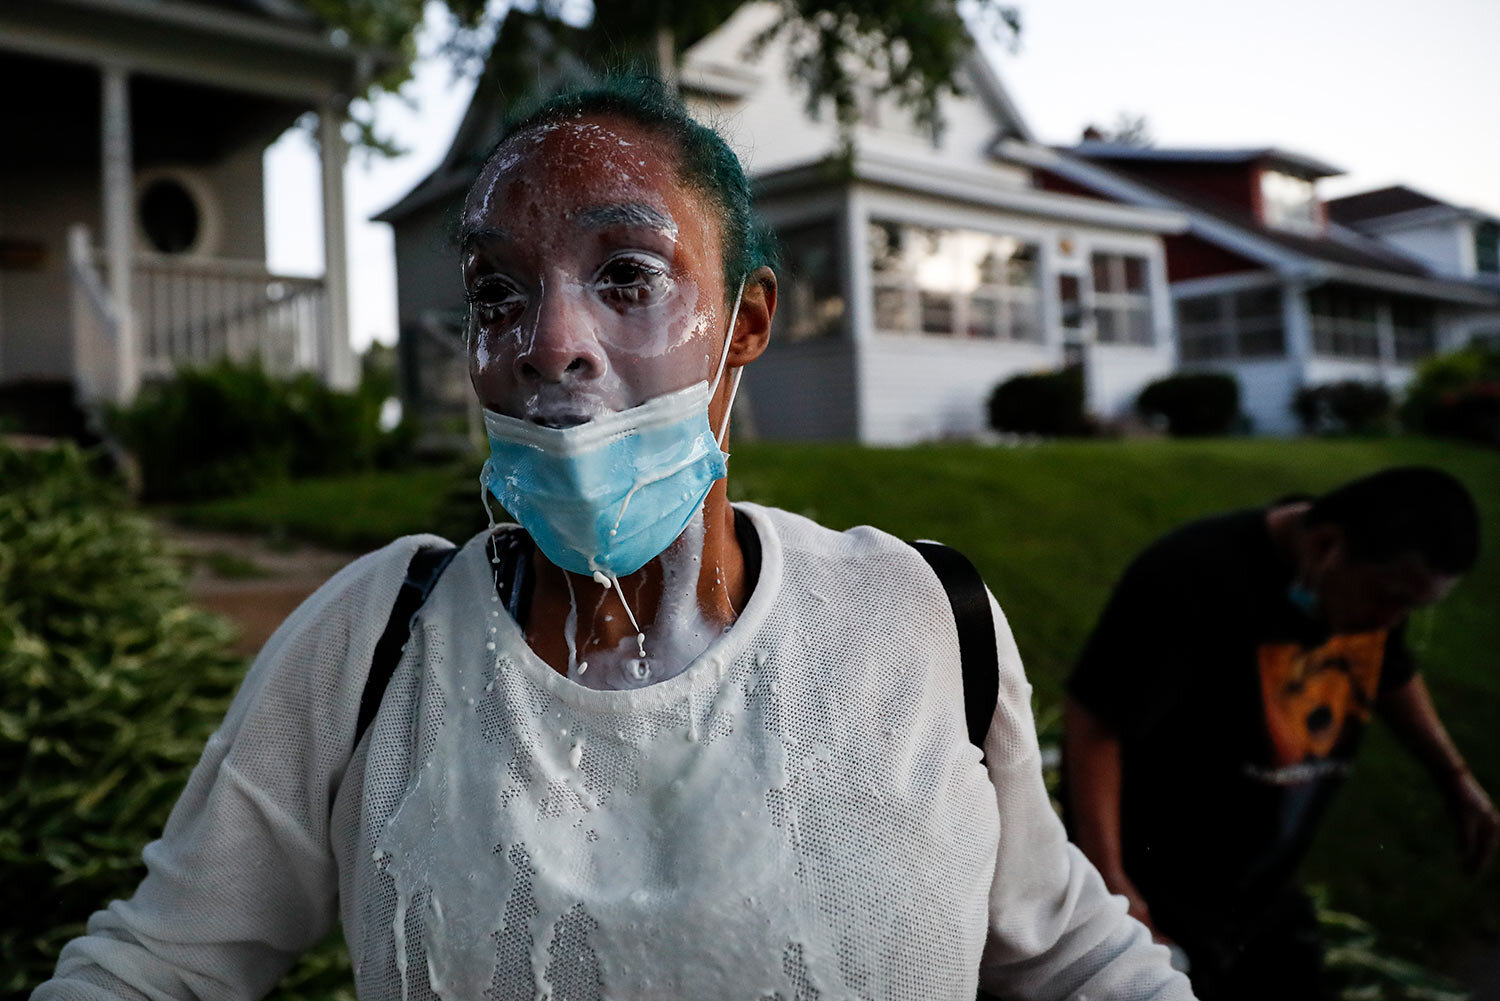  A protestor douses her face with milk after being exposed to tear gas fired by police, Thursday, May 28, 2020, in St. Paul, Minn. Protests over the death of George Floyd, a black man who died in police custody Monday, broke out in Minneapolis for a 